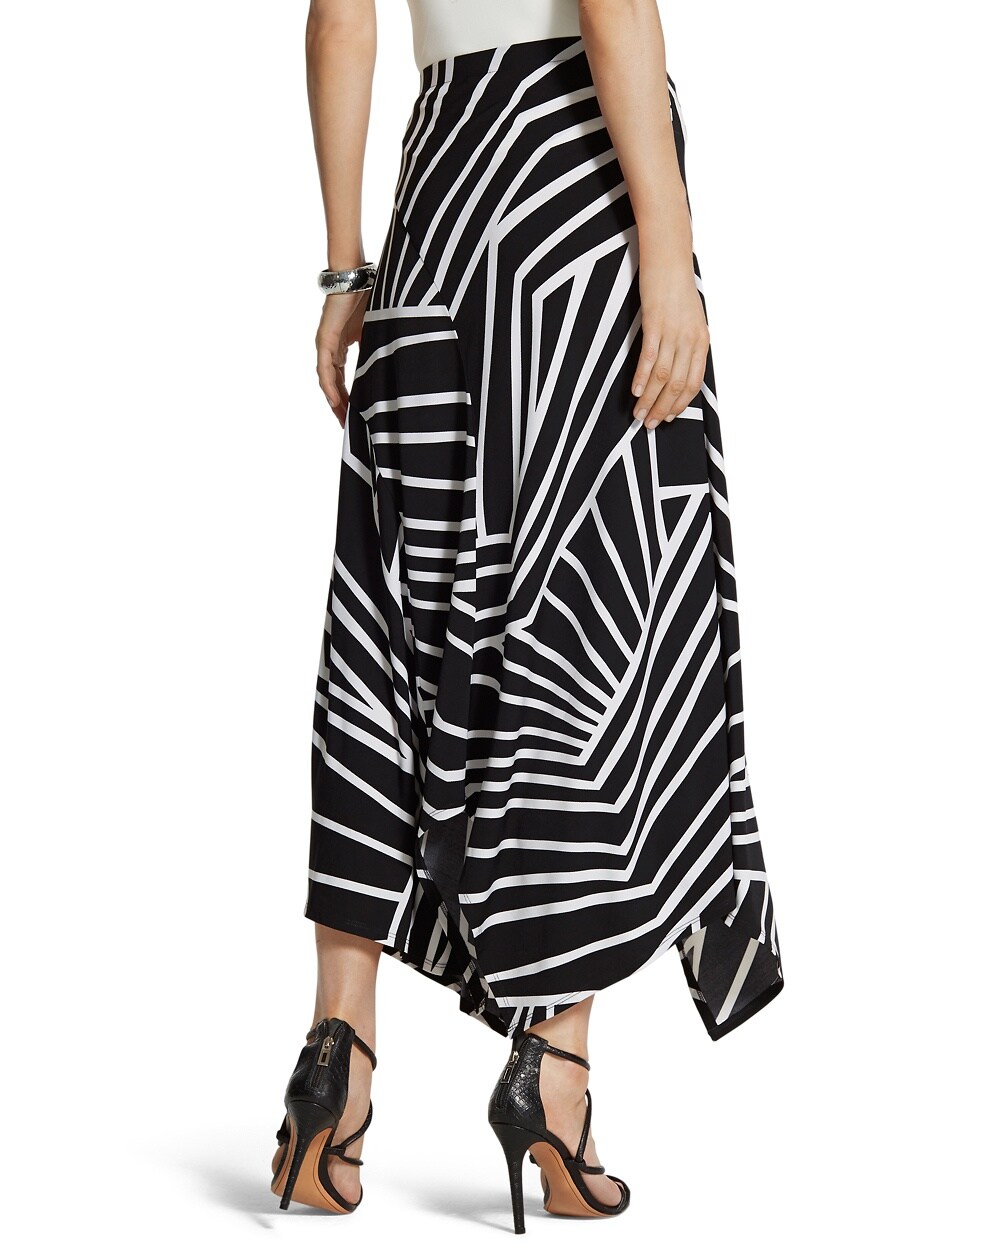 Striped Maxi Skirt - Women's New Clothing - Tops, Bottoms & Accessories ...